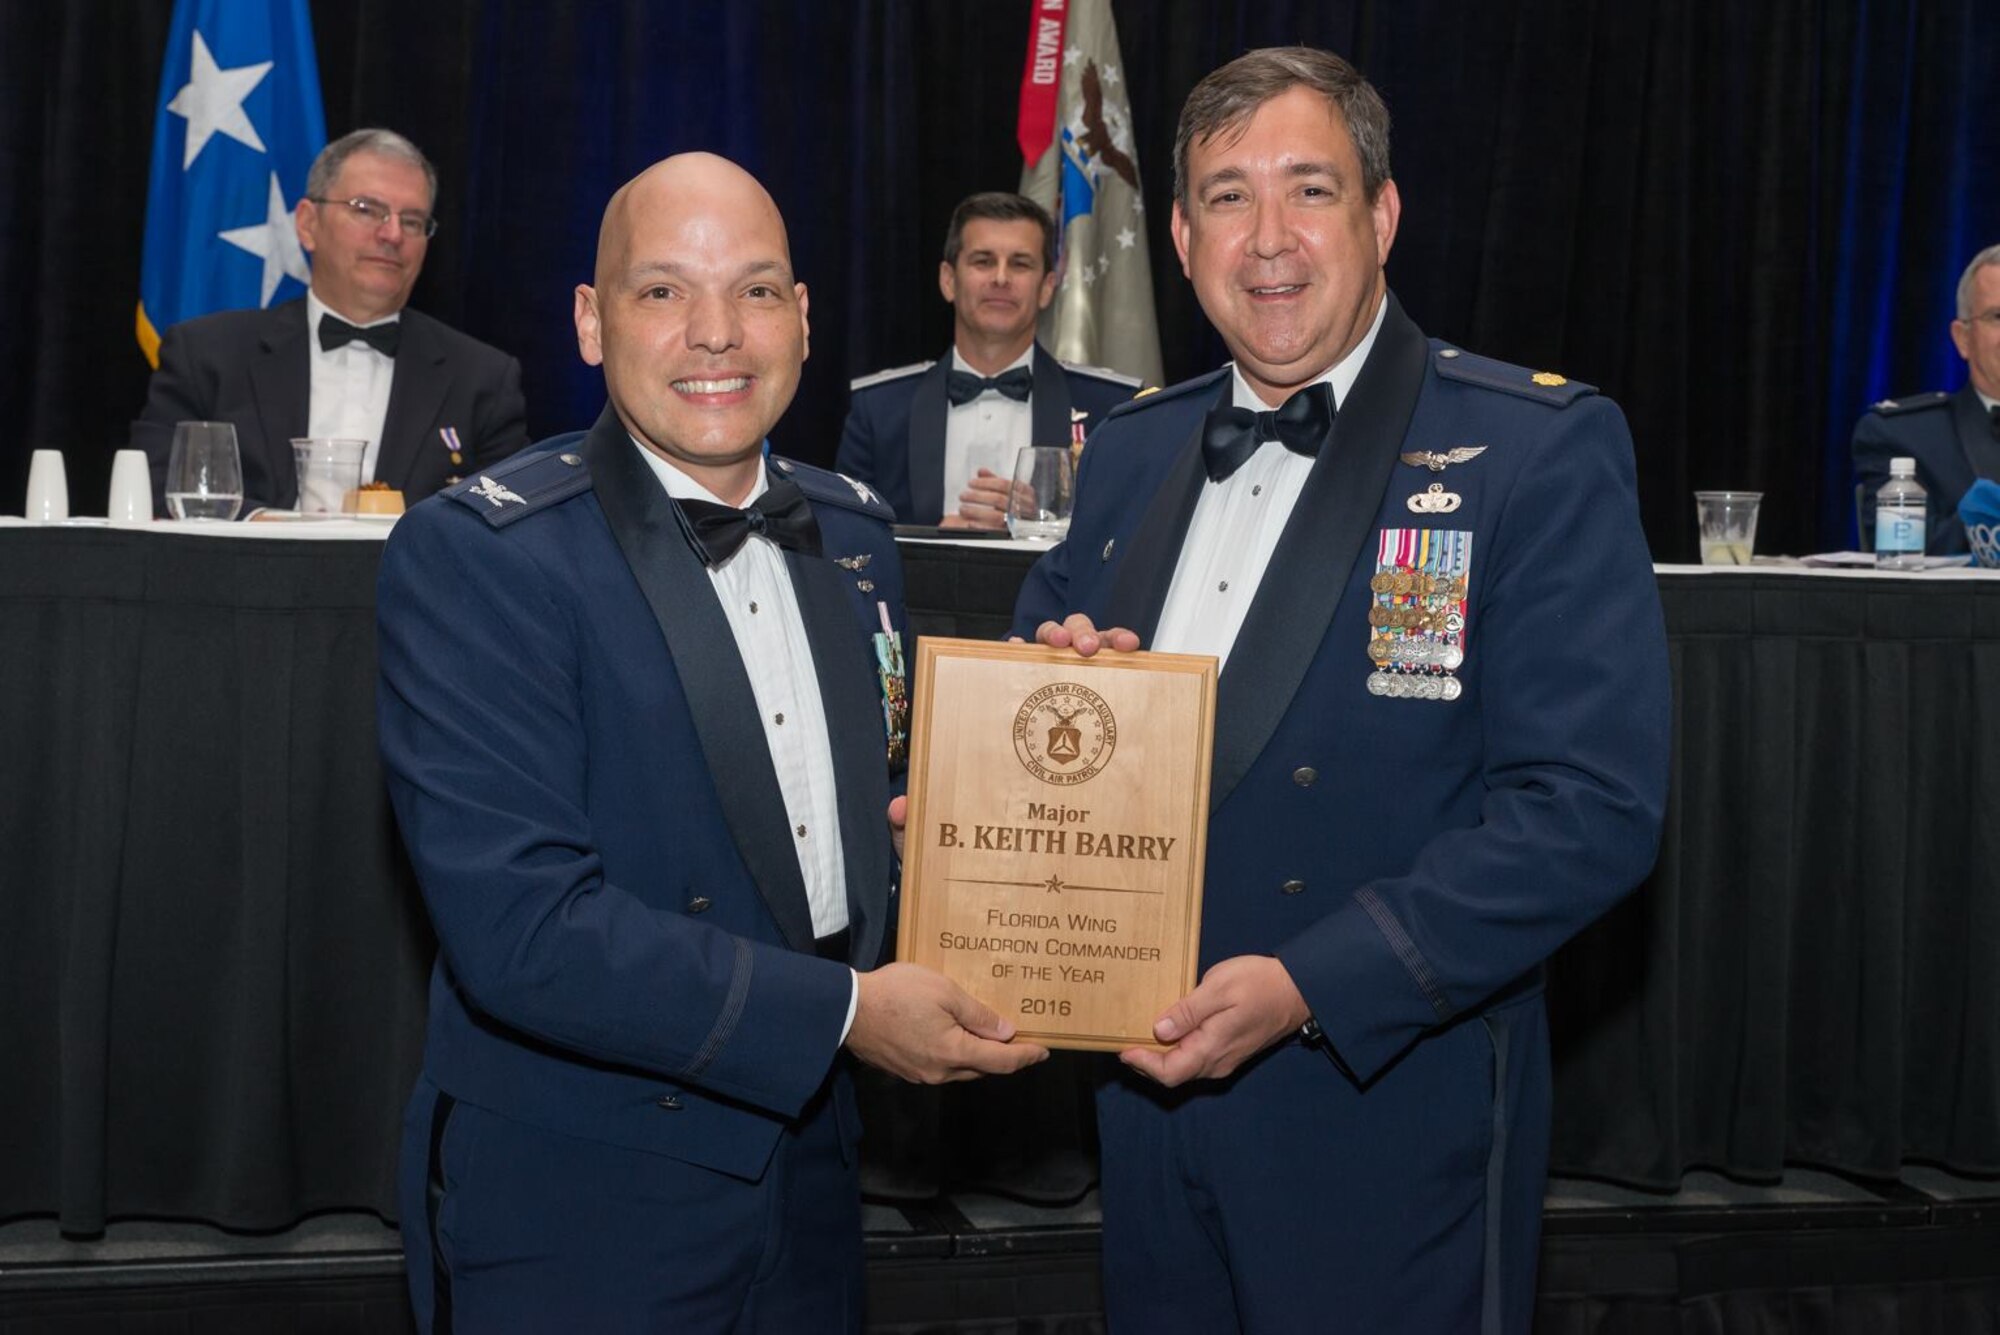 Civil Air Patrol Major Keith Barry, right, the squadron commander with the Civil Air Patrol General Chuck Yeager Cadet Squadron, receives the 2016 Squadron Commander of the Year during the Florida Wing Conference in Orlando, Fla., April 29, 2017. The Civil Air Patrol mission focuses on emergency services, aerospace education, and cadet programs. (courtesy photo)